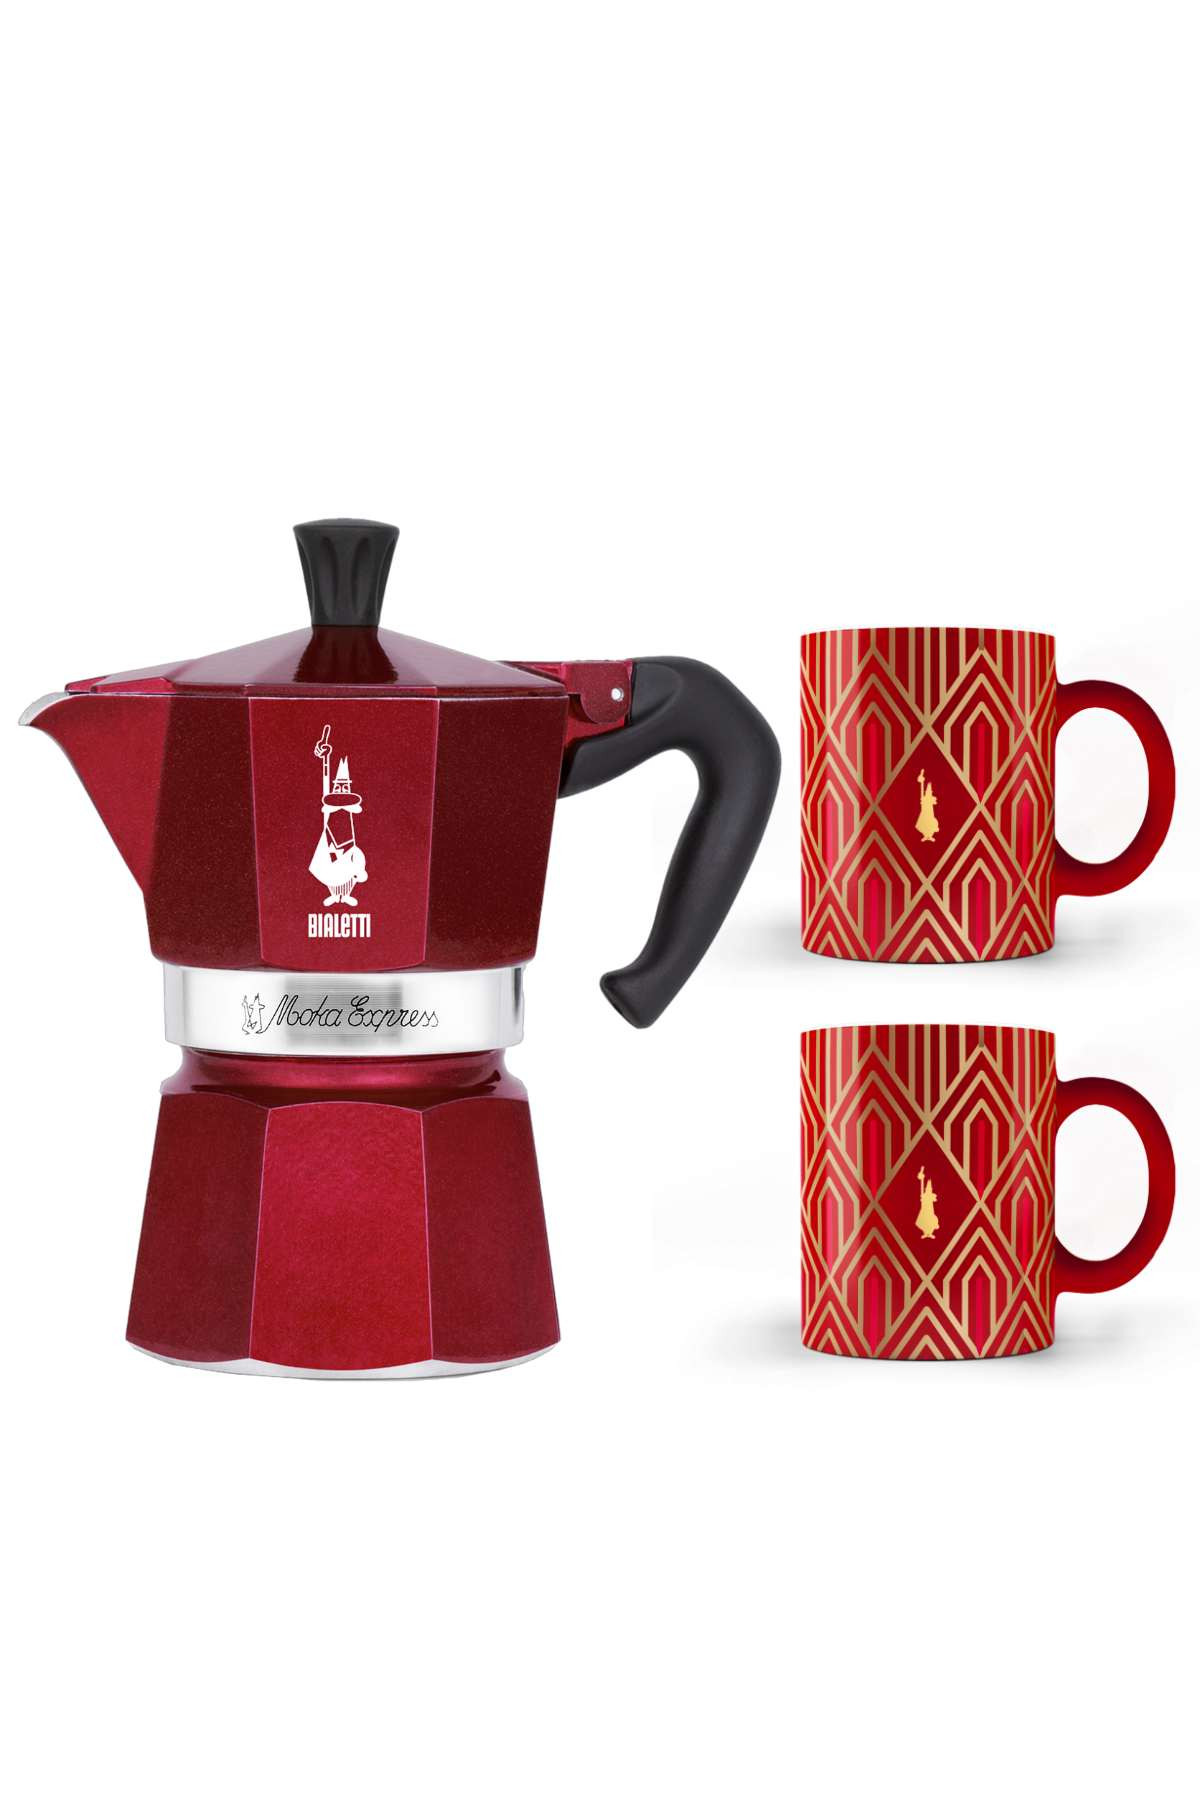 MOKA EXPRESS INDUCTION RED 2 CUPS, NEW - HEIROL Global - Kitchenware for  life